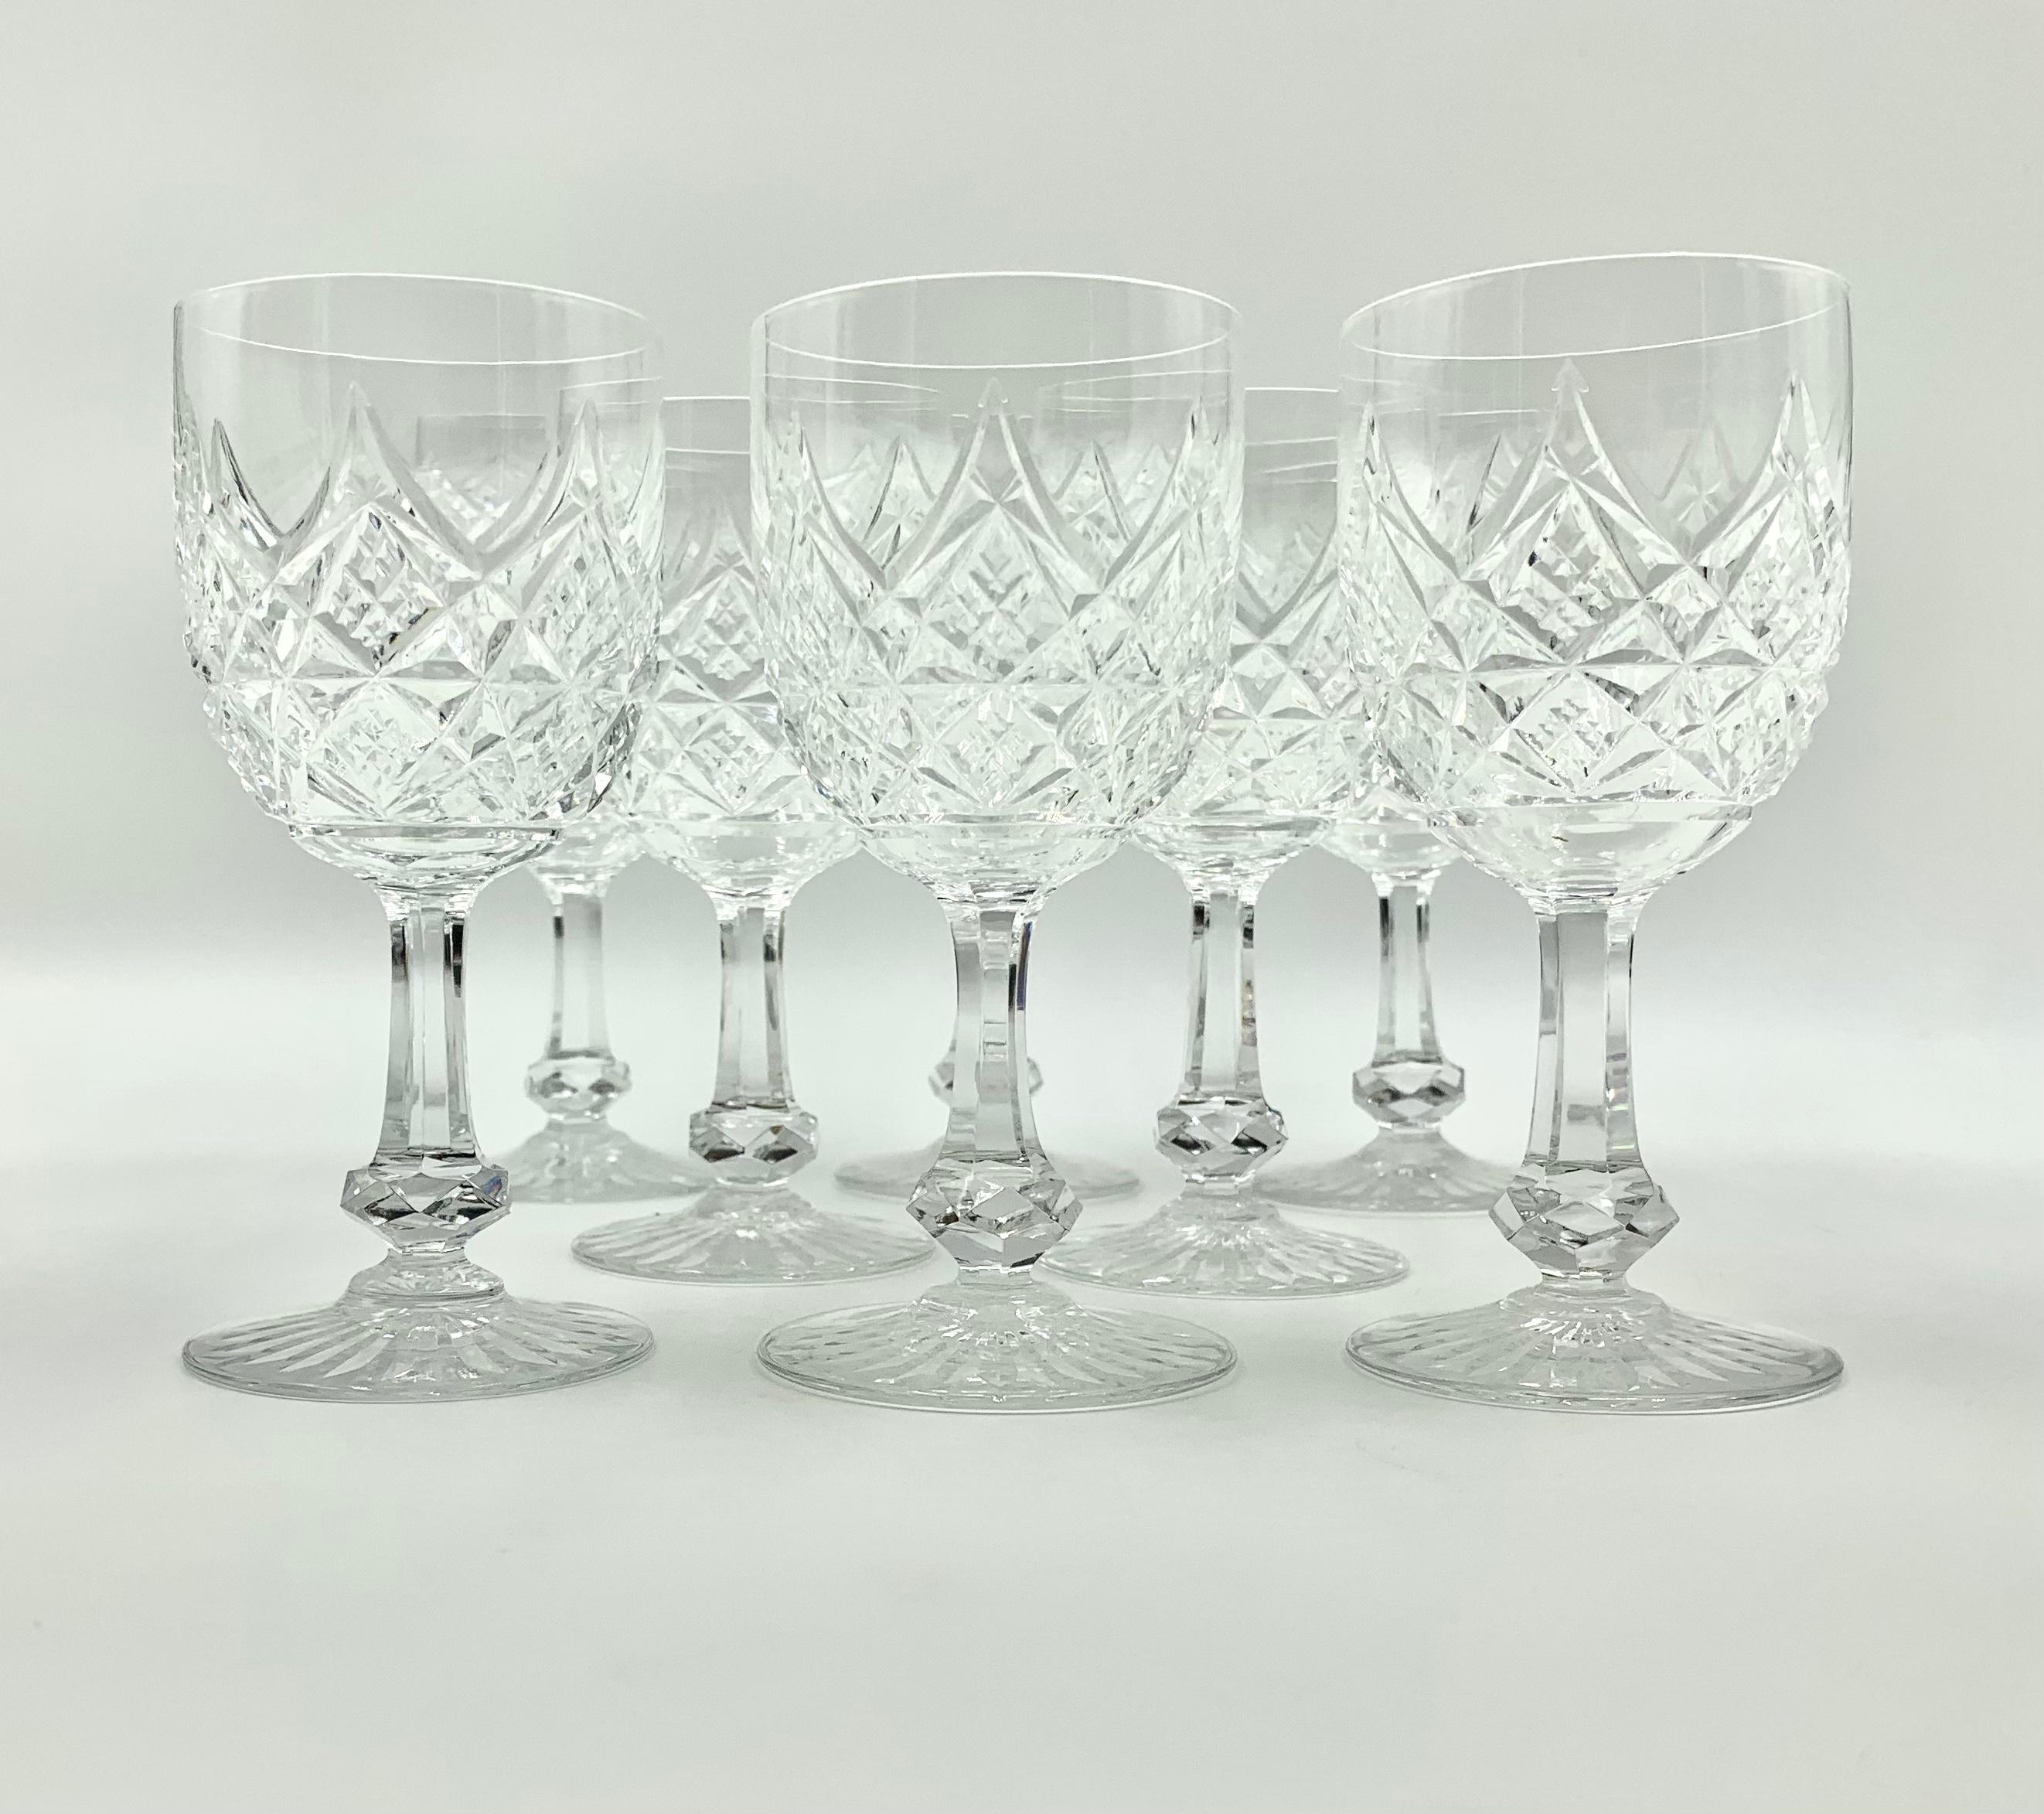 Rare Luxurious 24 Piece Baccarat Colbert Stemware Service for Eight For Sale 2